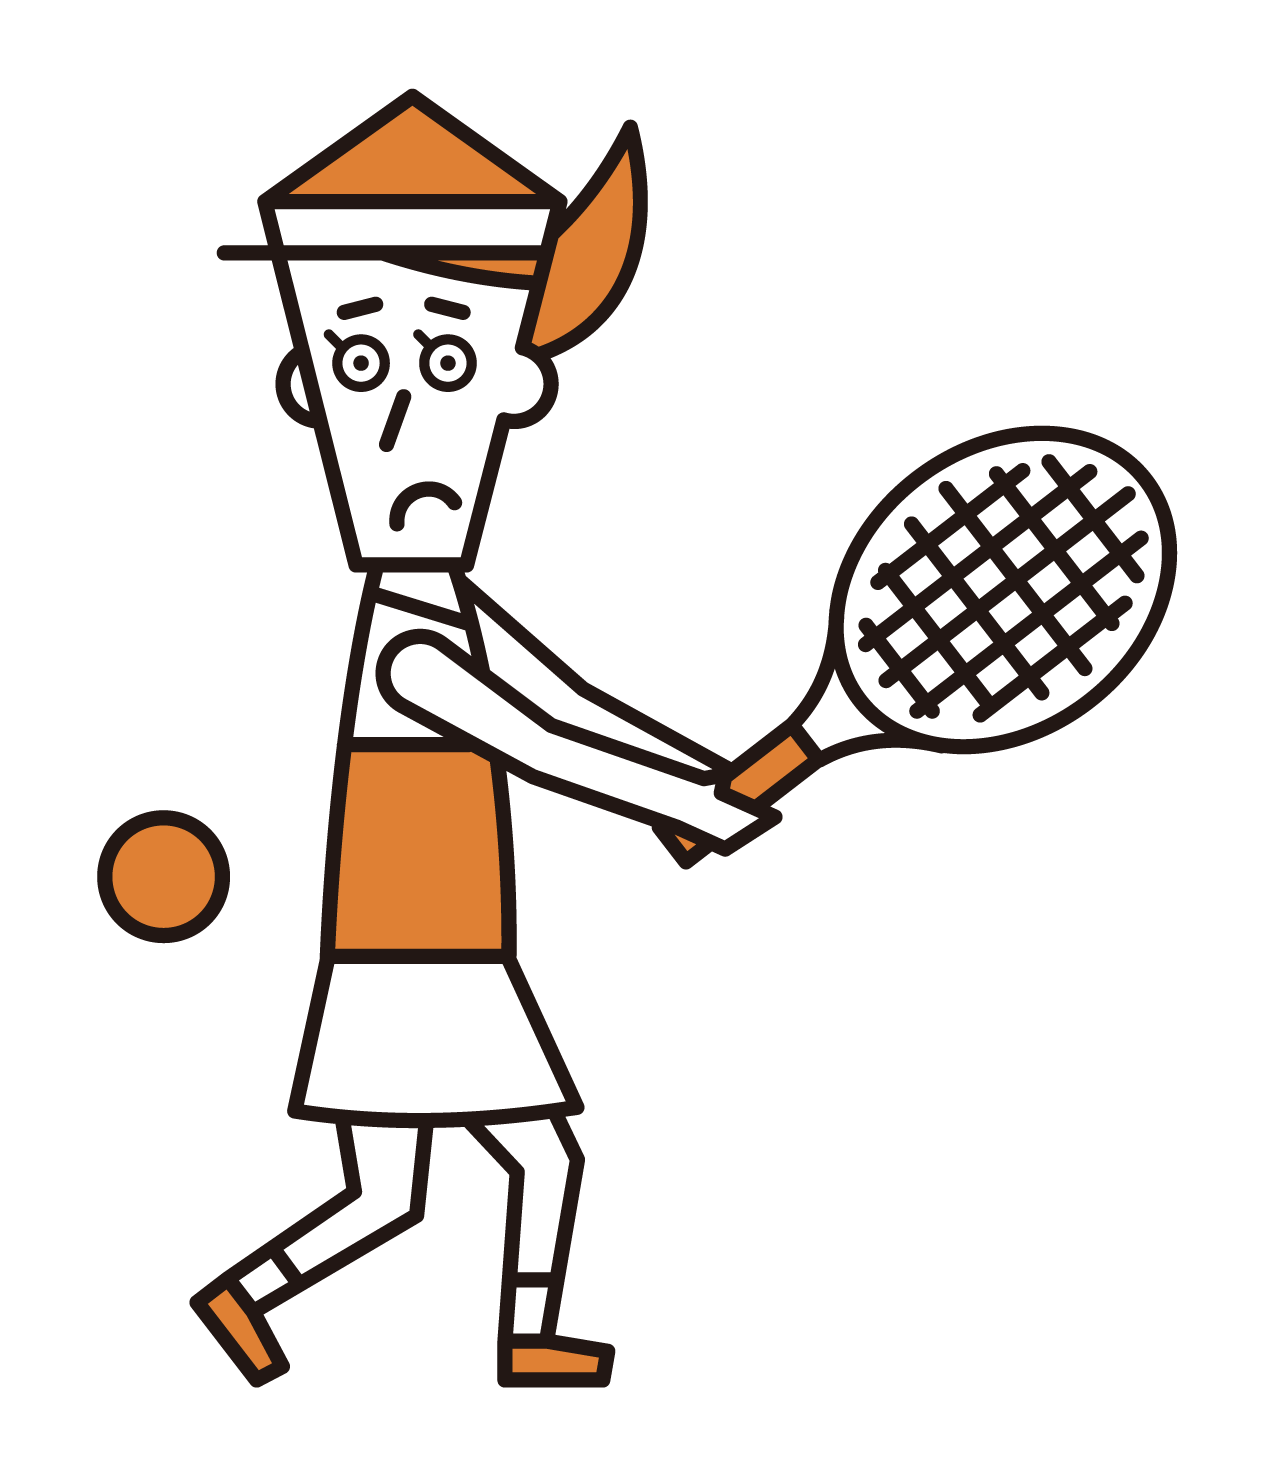 Illustration of a tennis player (female) hitting the ball back with a backhand stroke